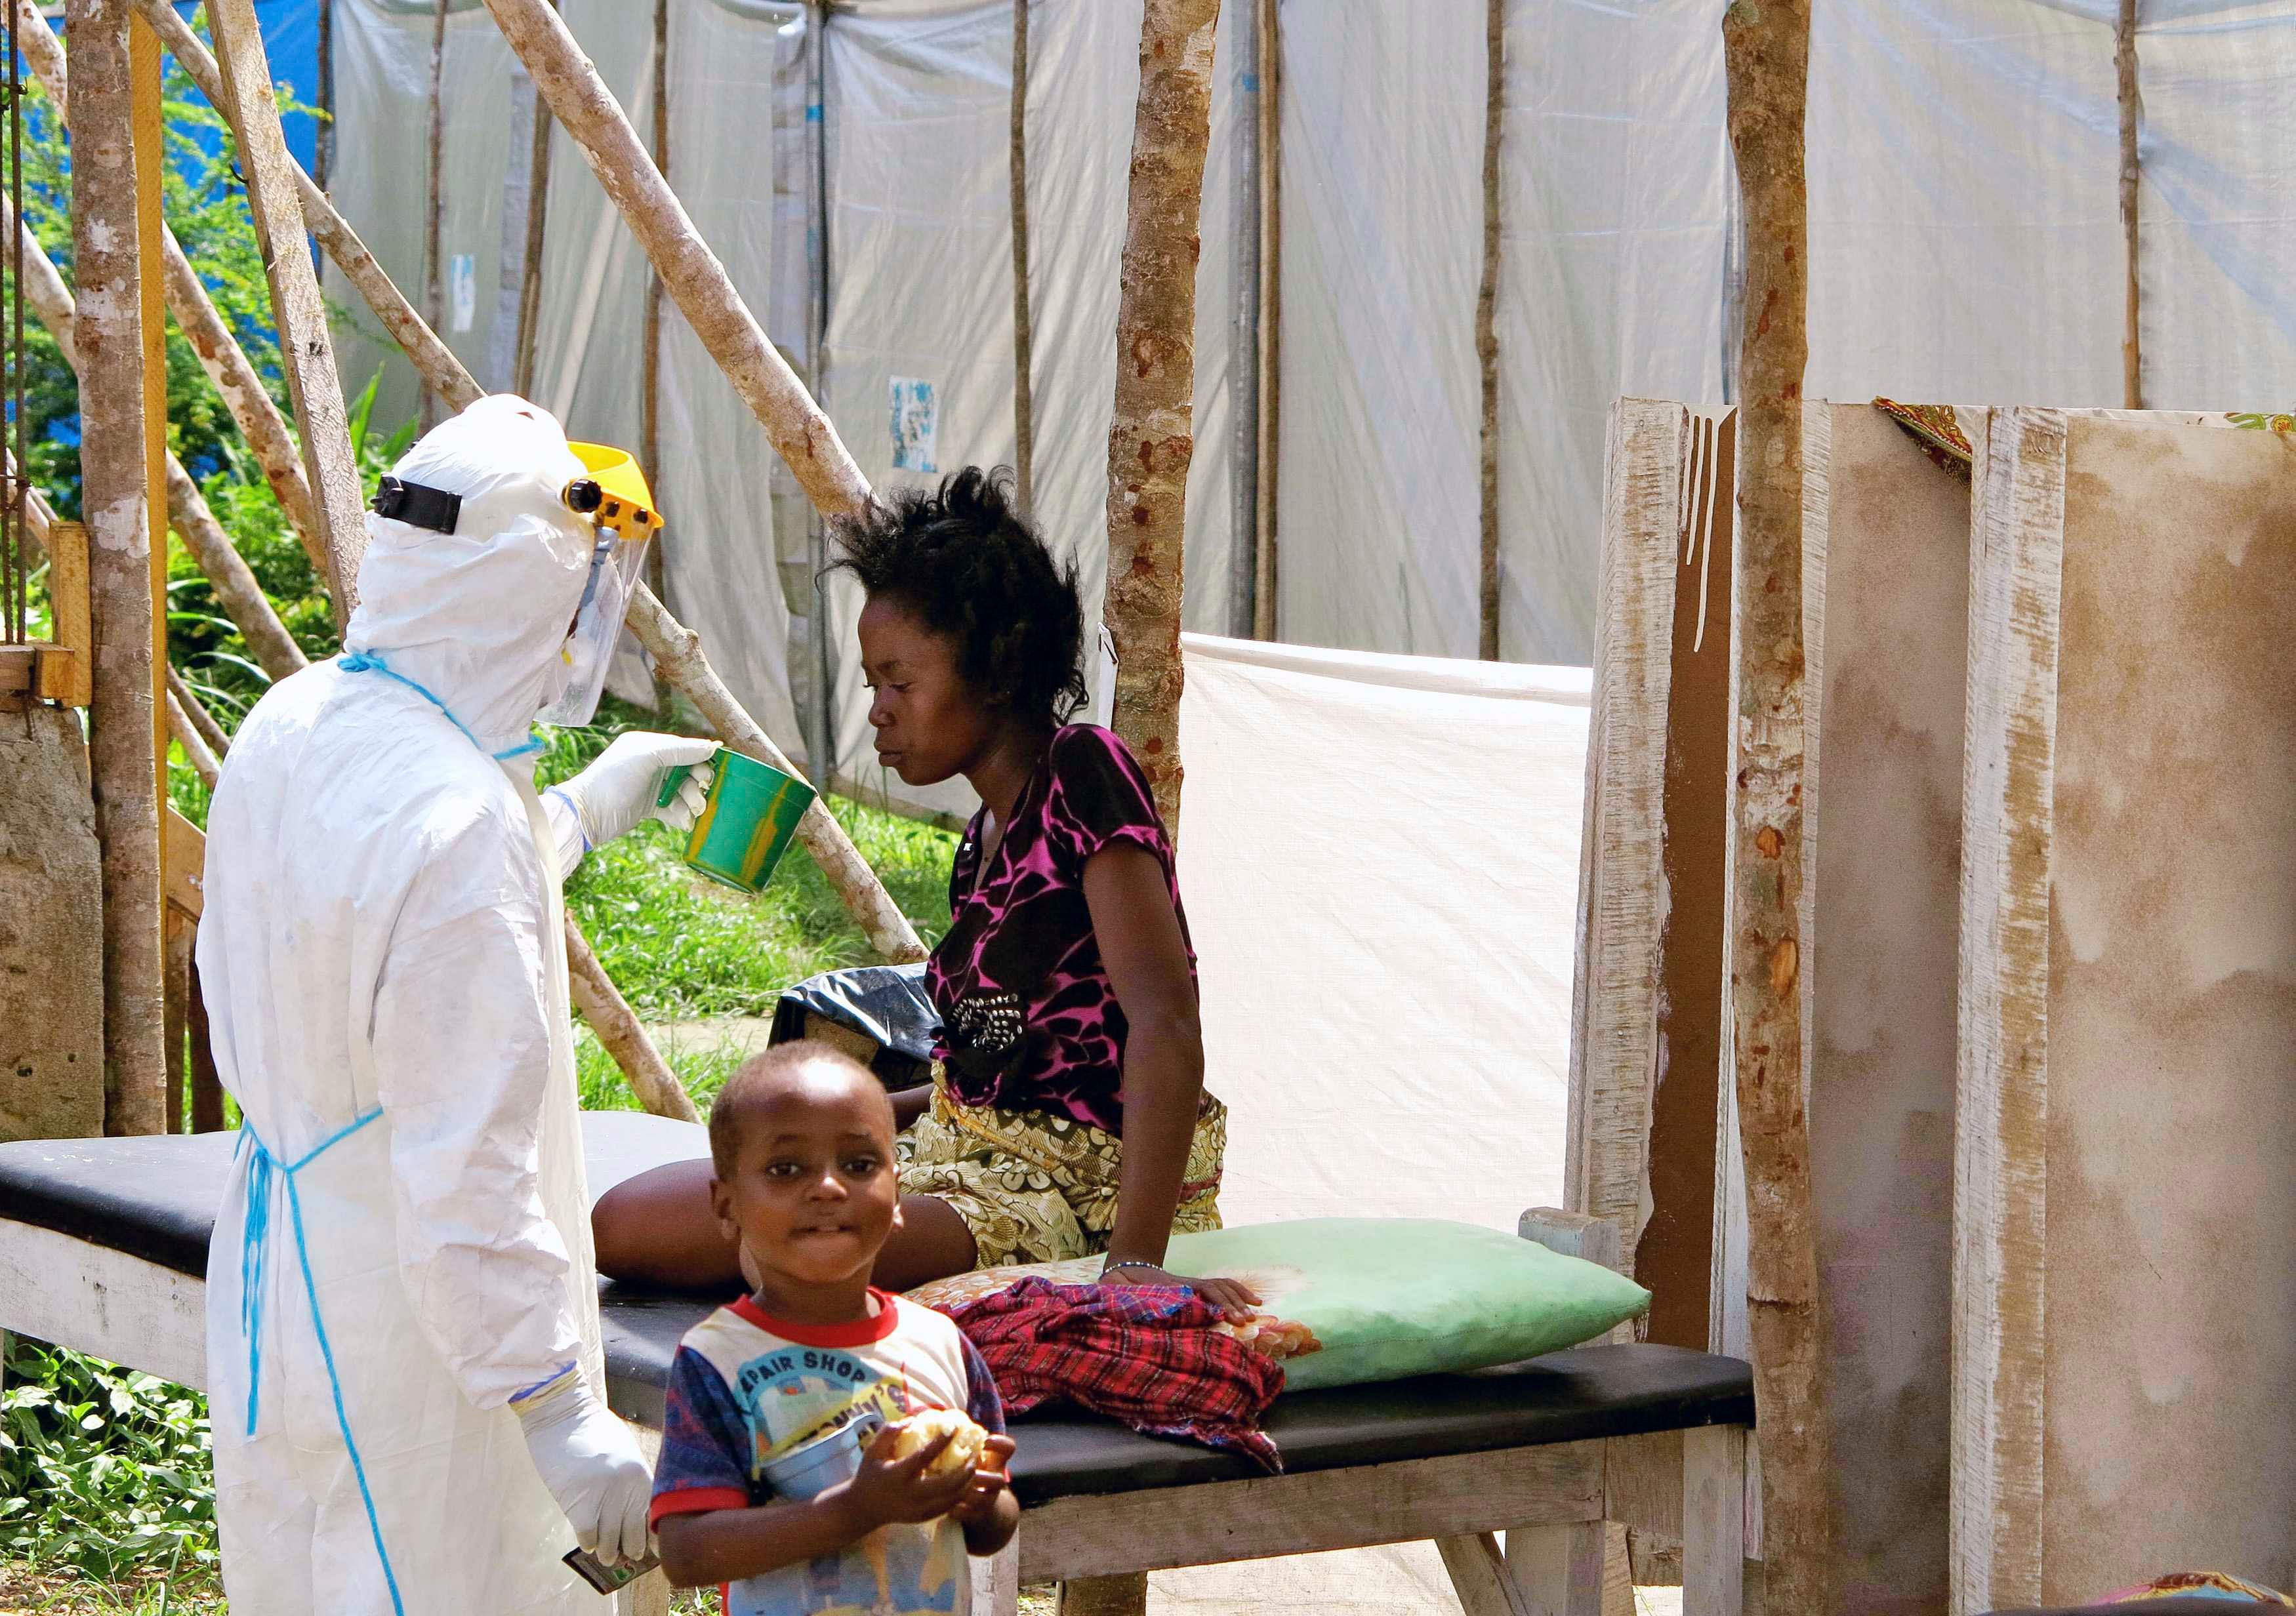 A health worker, wearing personal protection gear, offers water to a woman with Ebola virus disease (EVD), at a treatment centre for infected persons in Kenema Government Hospital, in Kenema, Eastern Province, Sierra Leone in this August, 2014 handout photo provided by UNICEF August 6, 2014. Workers in the treatment centre are stretched to capacity. UNICEF is supporting the hospital by providing treatment supplies like intravenous fluids and equipment such as protective gear and body bags. As of 4 August, a total of 1,711 cases, including 932 deaths, had been attributed to EVD in the four West African countries of Guinea, Liberia, Nigeria and Sierra Leone. Sierra Leone has borne 691 of these cases (576 confirmed, 49 probable and 66 suspected), including 286 deaths. Photo: Reuters